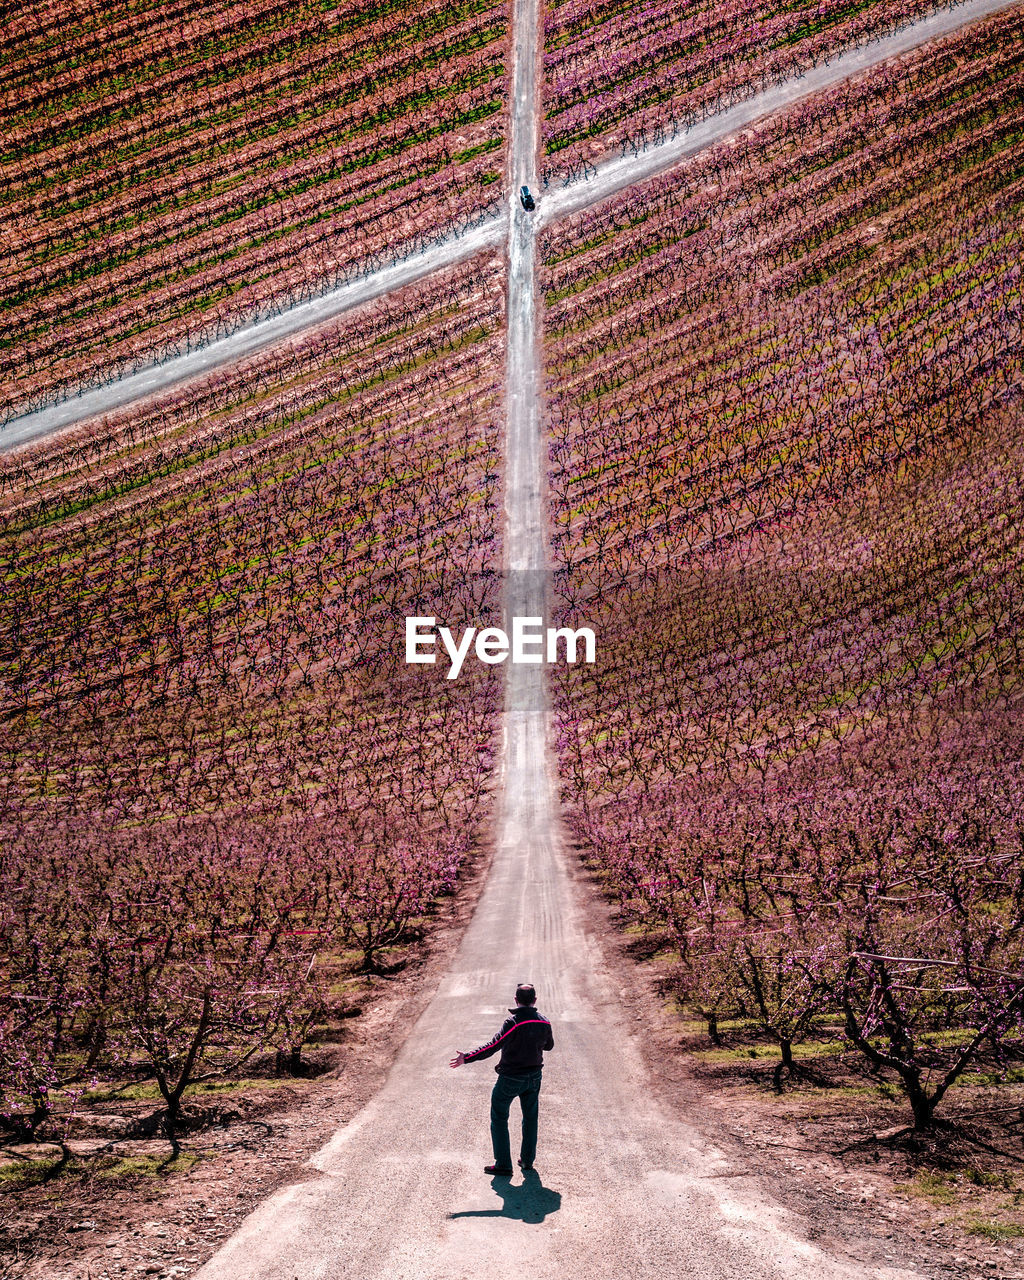 Full length rear view of man in a blooming peach field, inception style.